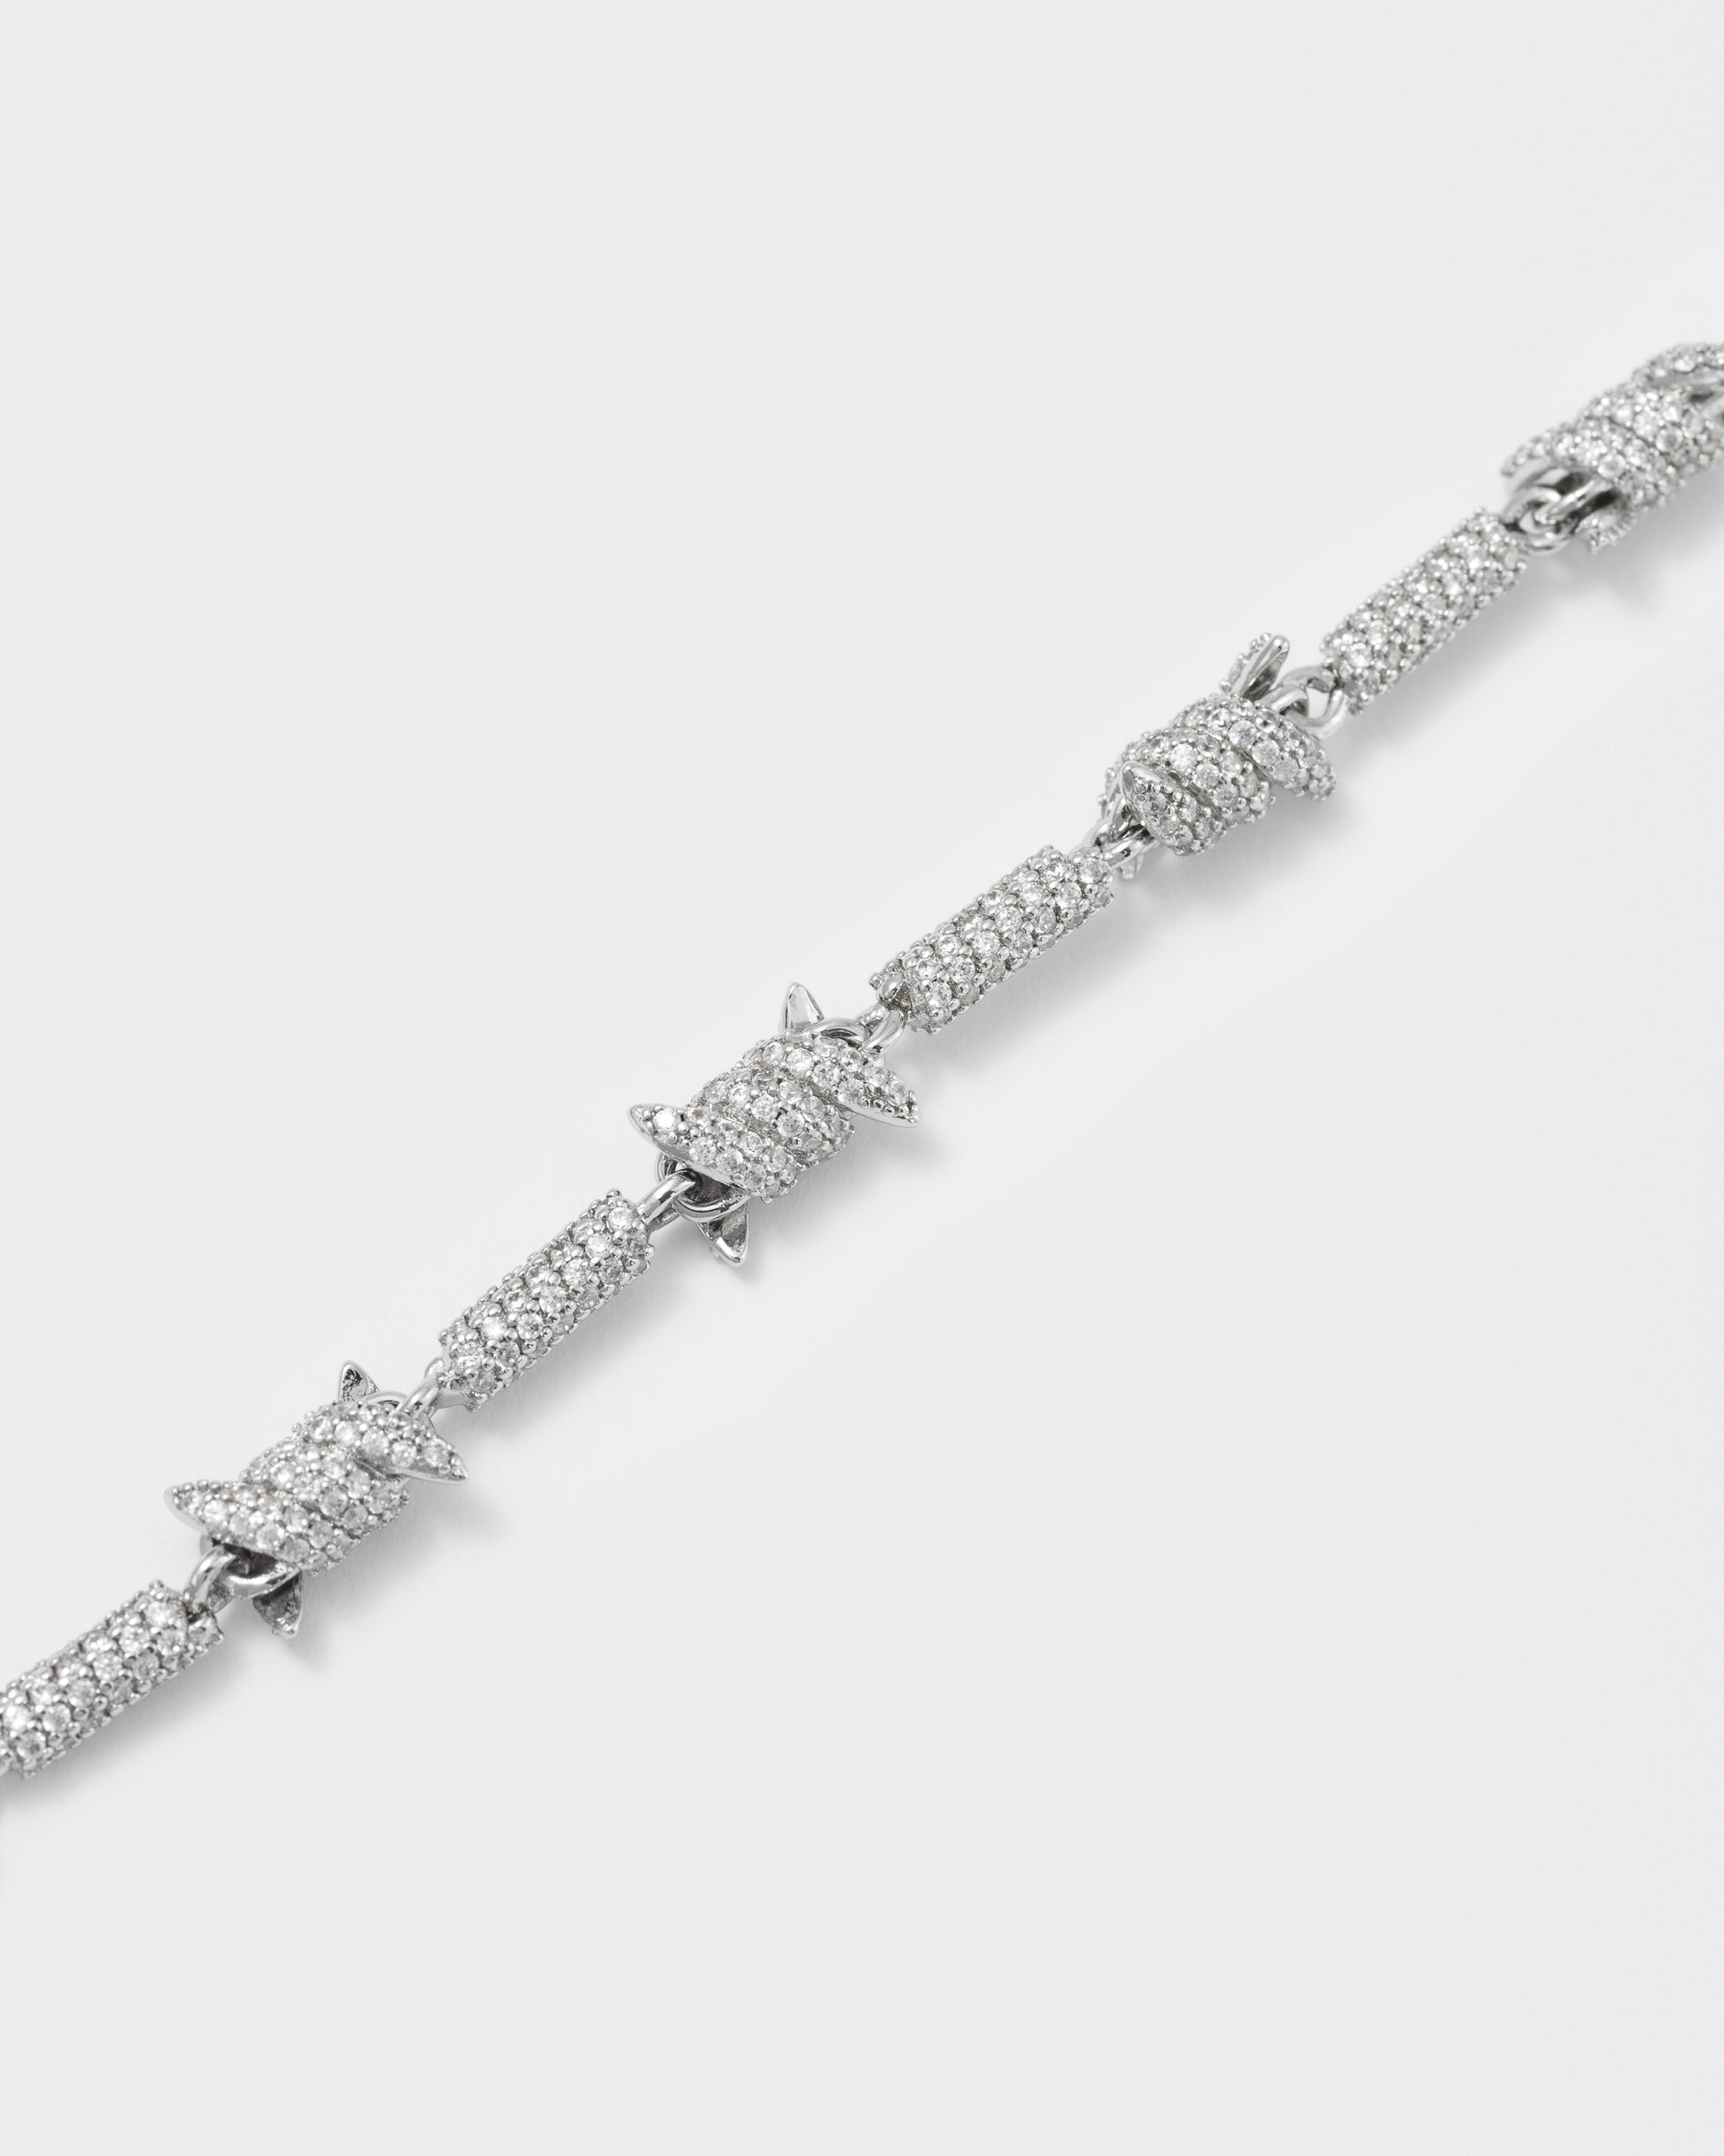 detail of barbed Wire bracelet with 18kt white gold coating and hand-set micropavé stones in diamond white. Lobster clasp closure with logo